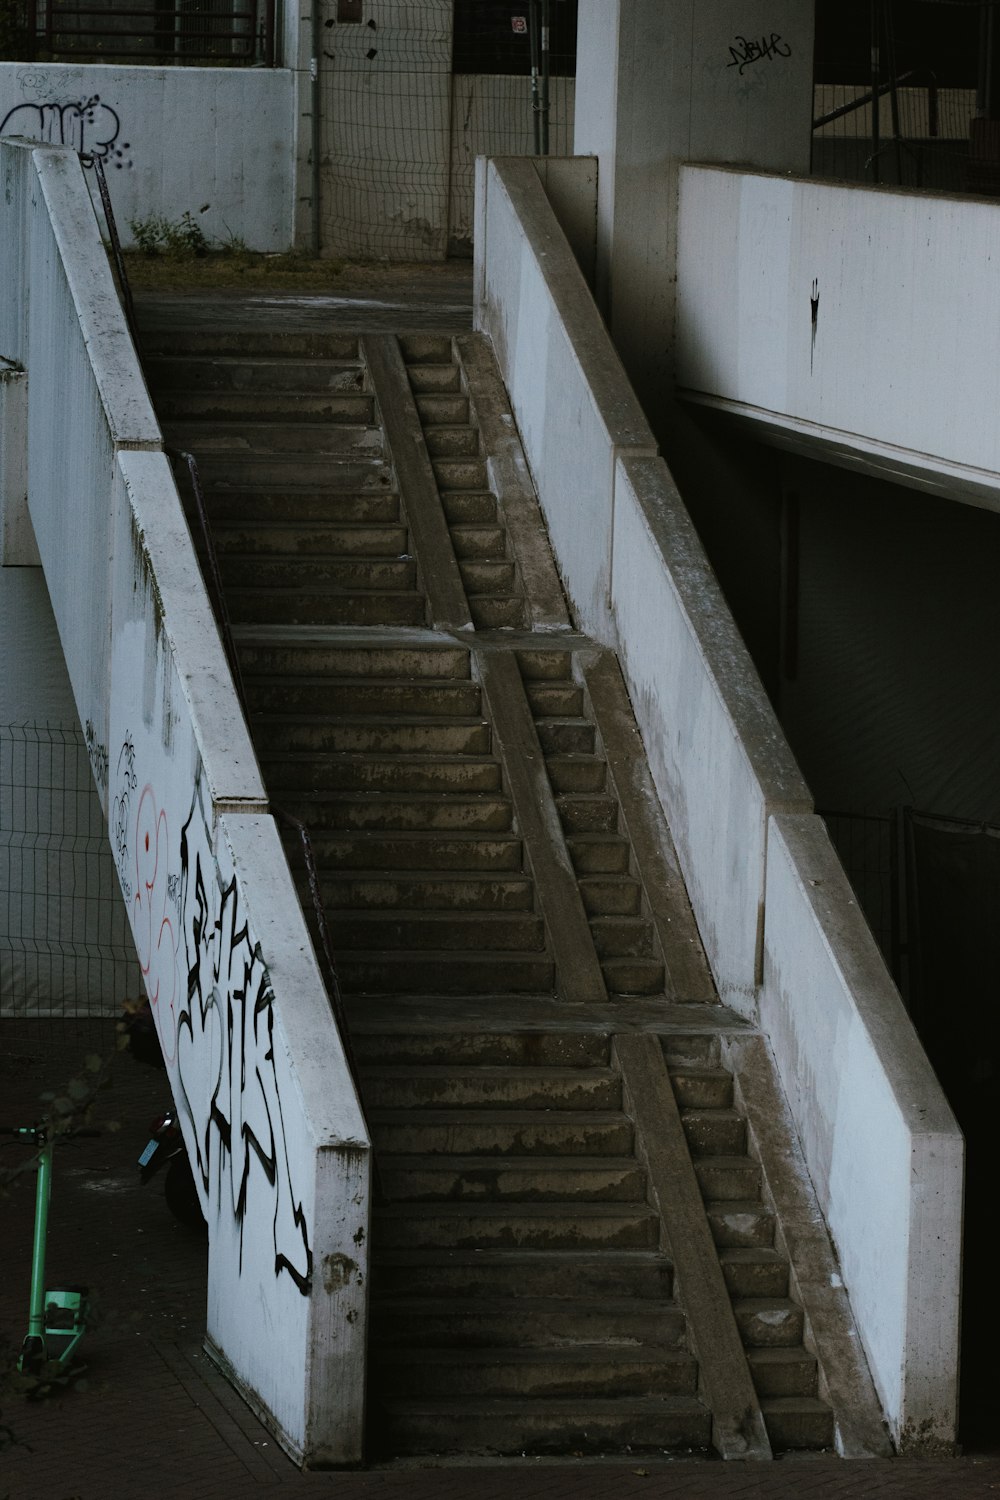 a set of stairs with graffiti on them